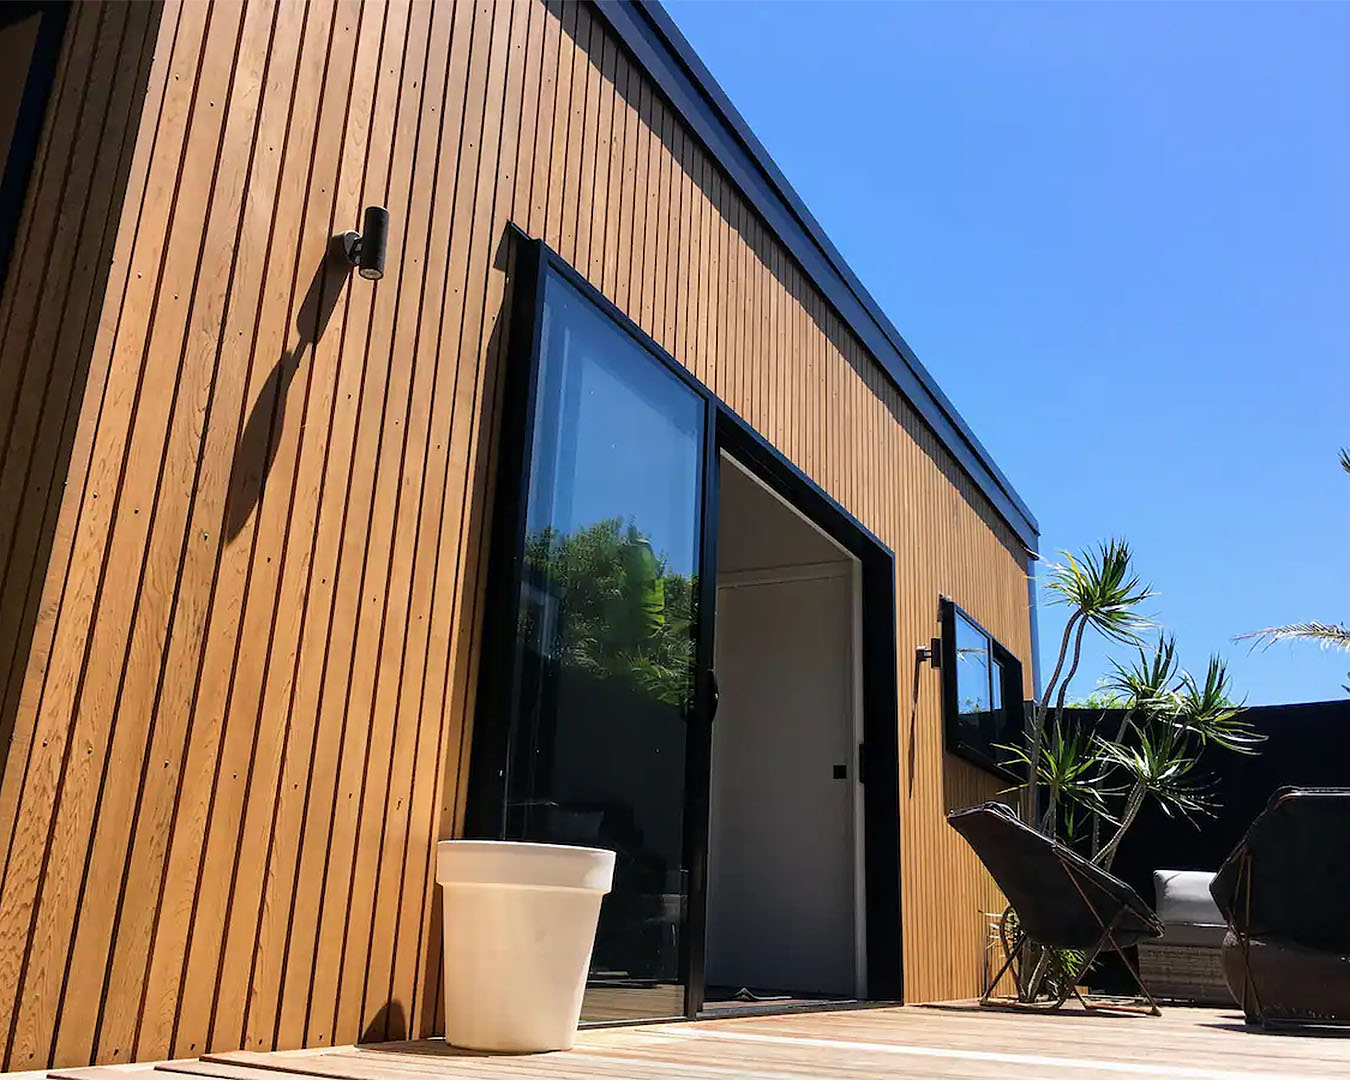 The wooden exterior of the Oasis in the bridge, one of the best airbnbs in Auckland.